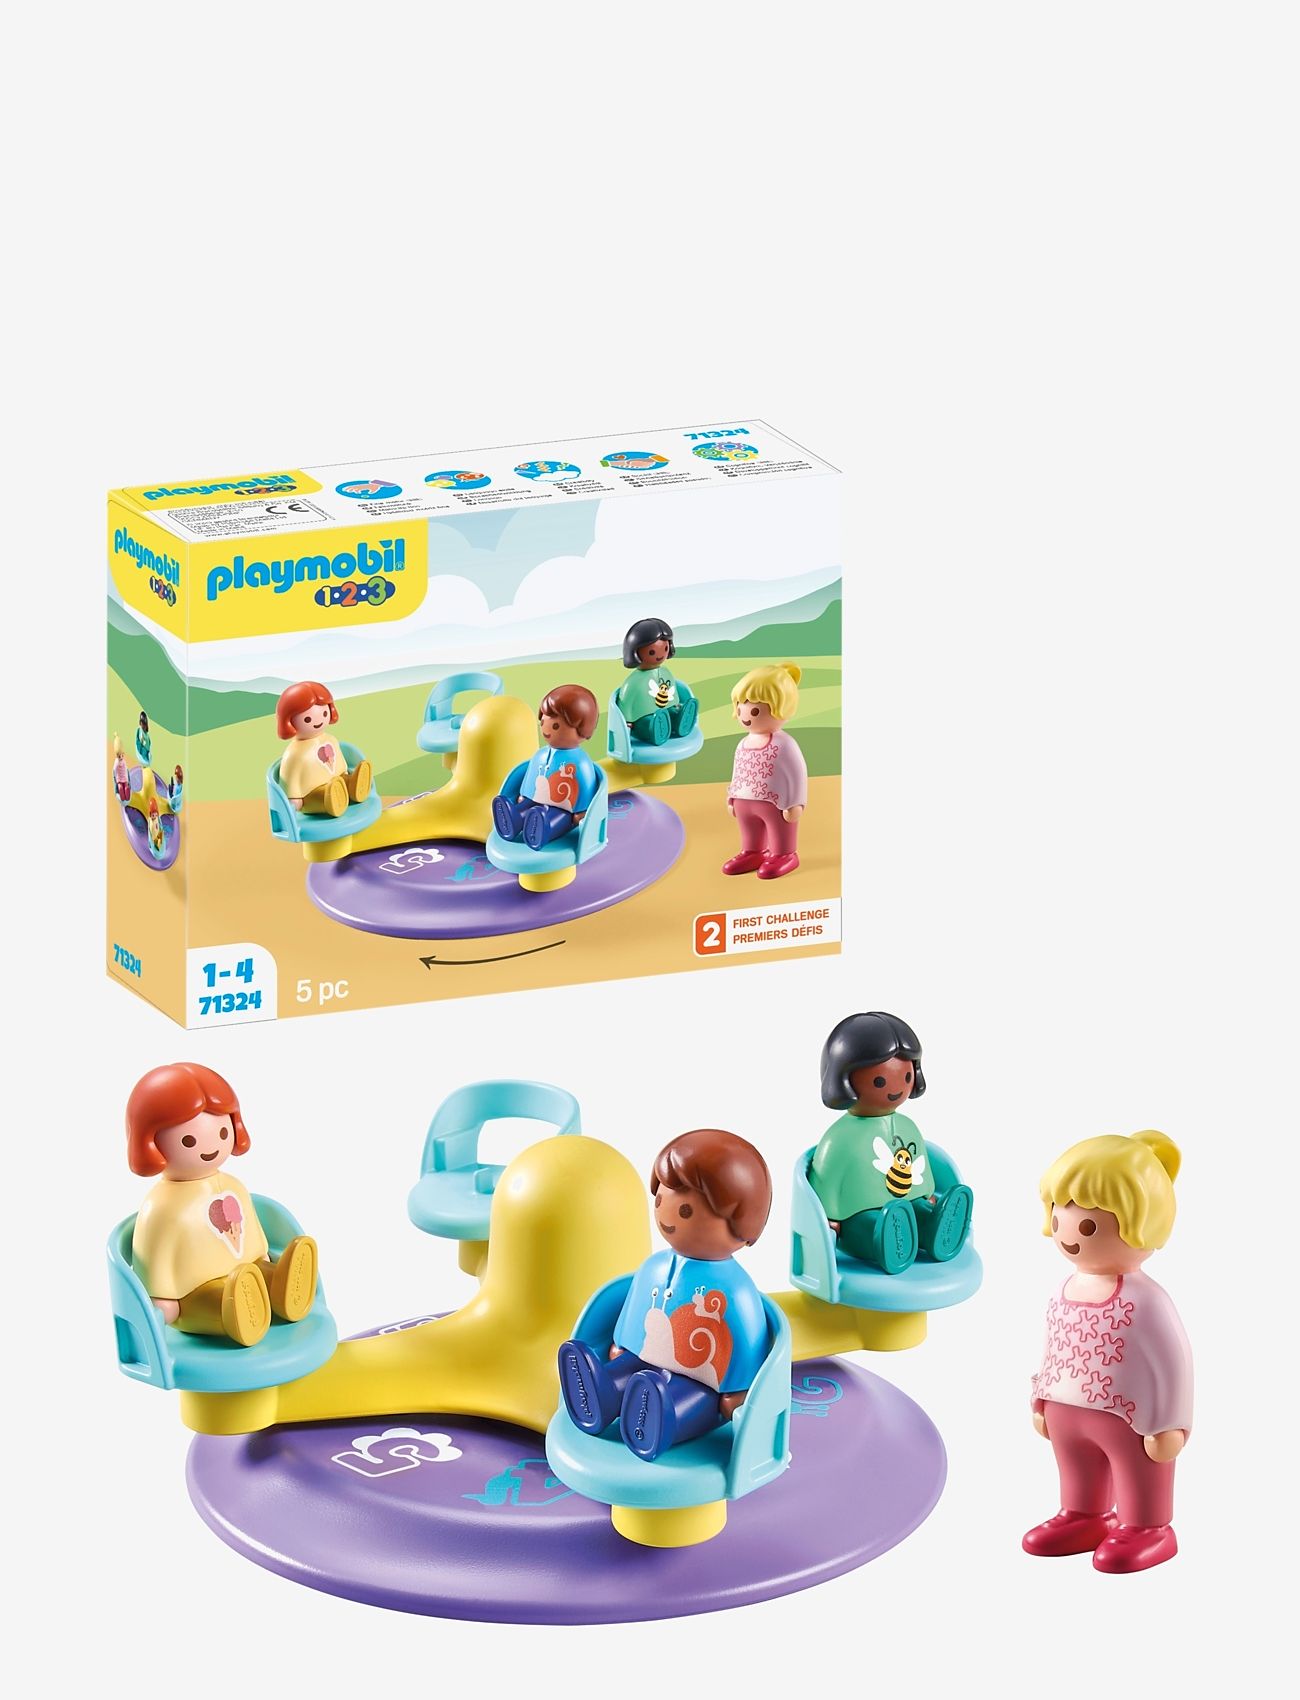 PLAYMOBIL - PLAYMOBIL 1.2.3: Number-Merry-Go-Round - 71324 - playmobil 1.2.3 - multicolored - 0